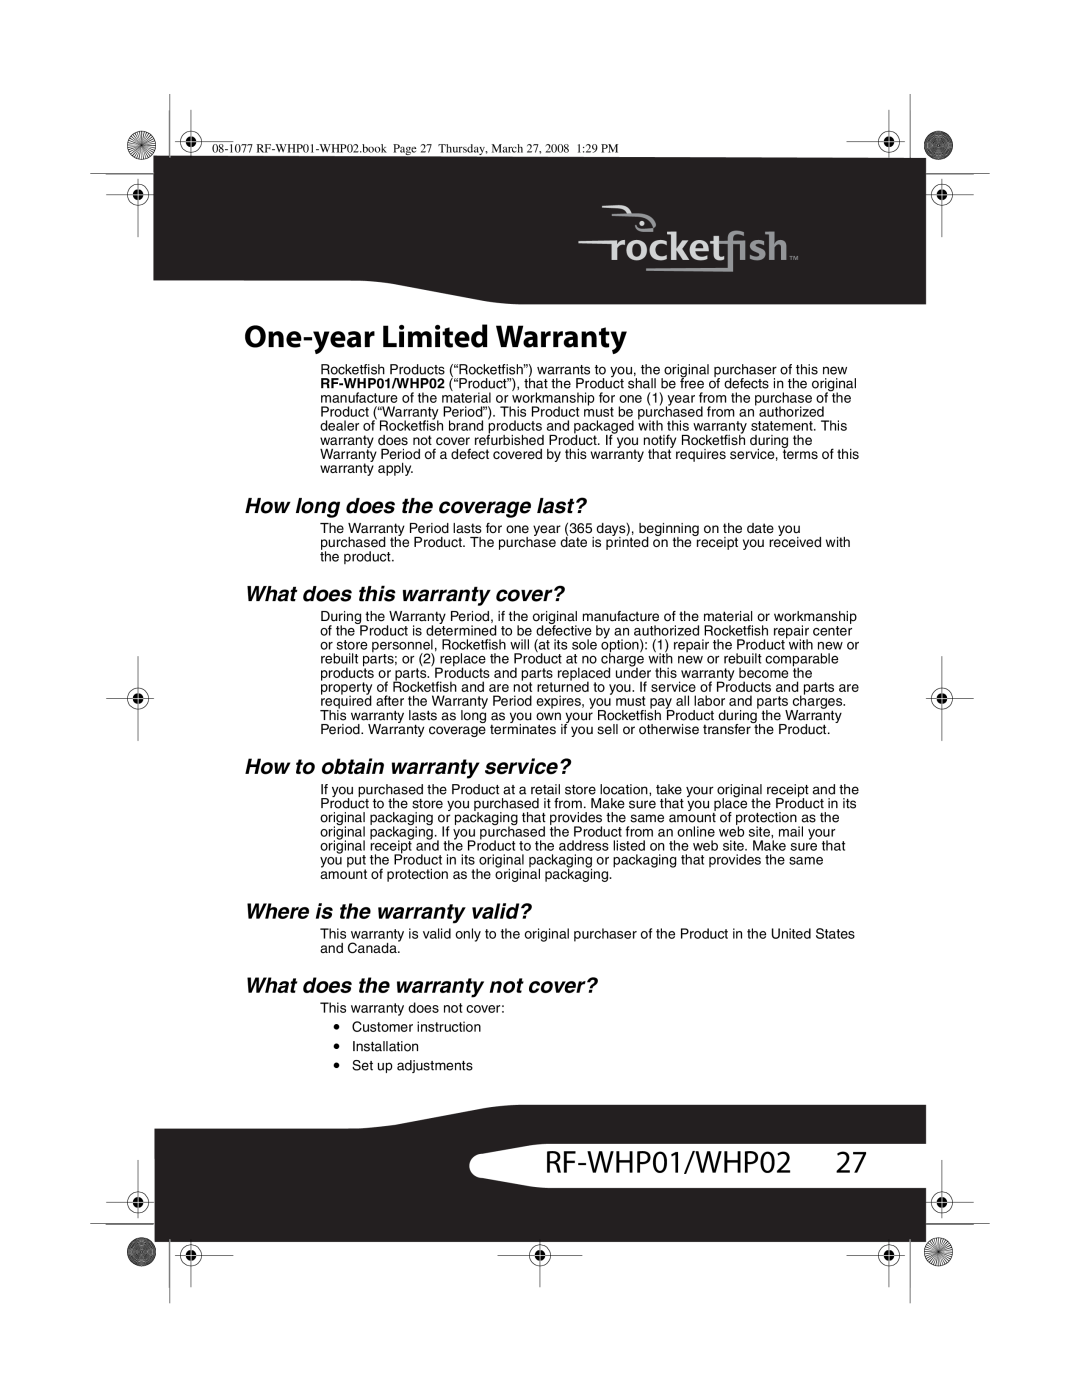 RocketFish RF-WHP02 manual One-yearLimited Warranty, RF-WHP01/WHP0227, How long does the coverage last? 